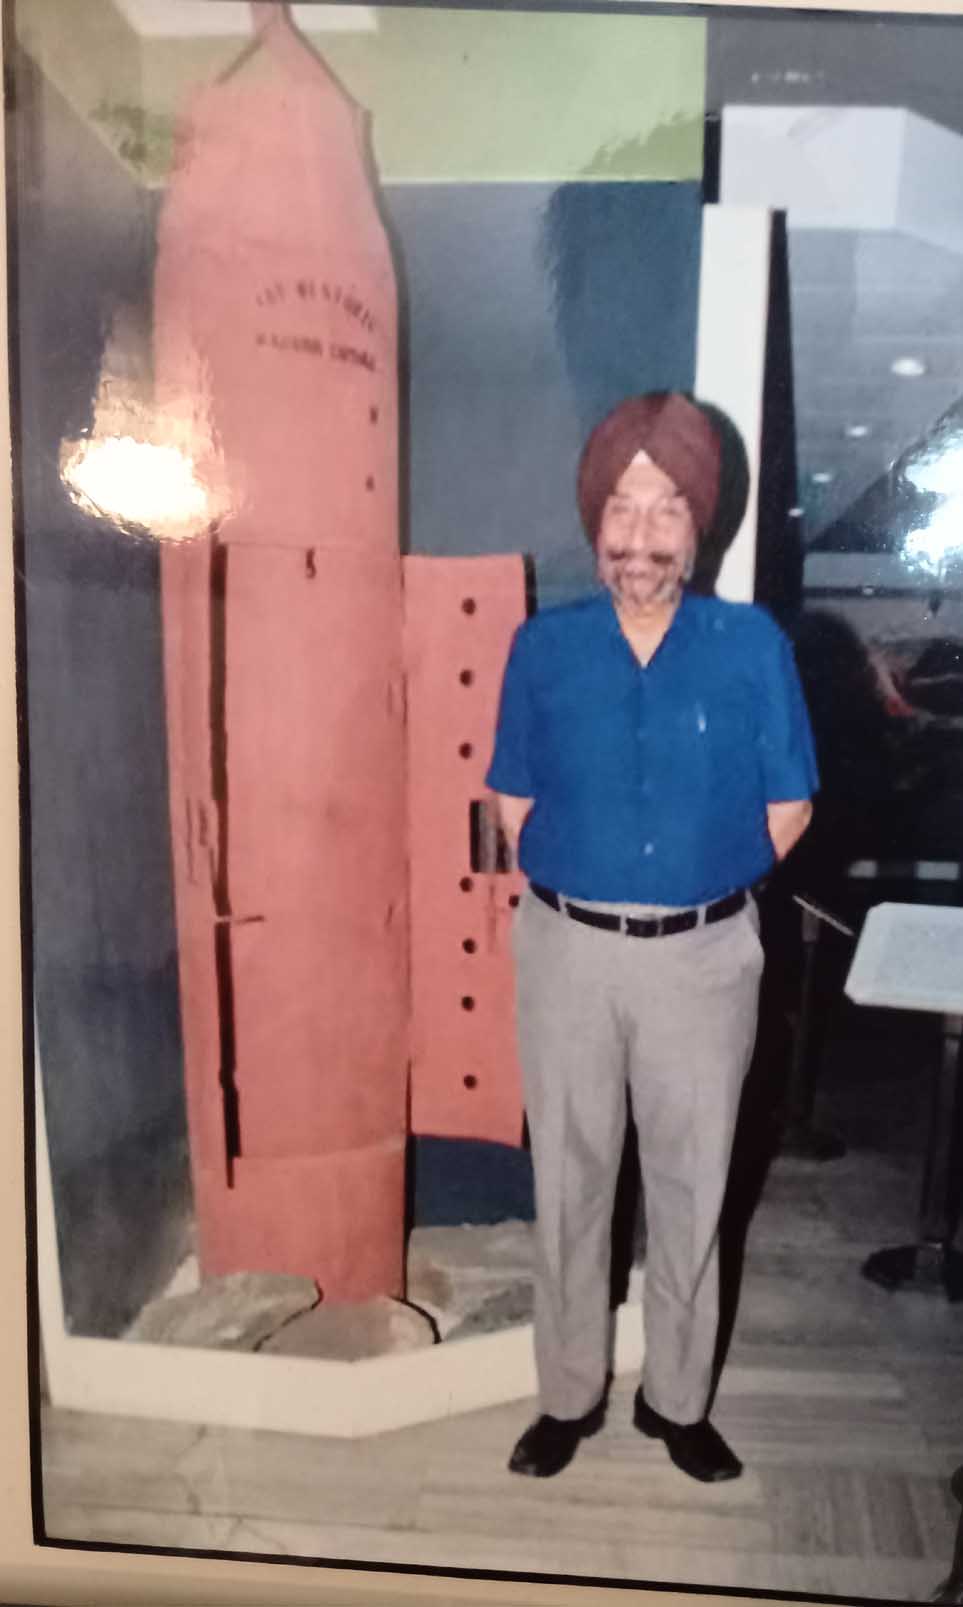 Jaswant Singh Gill and his Capsule